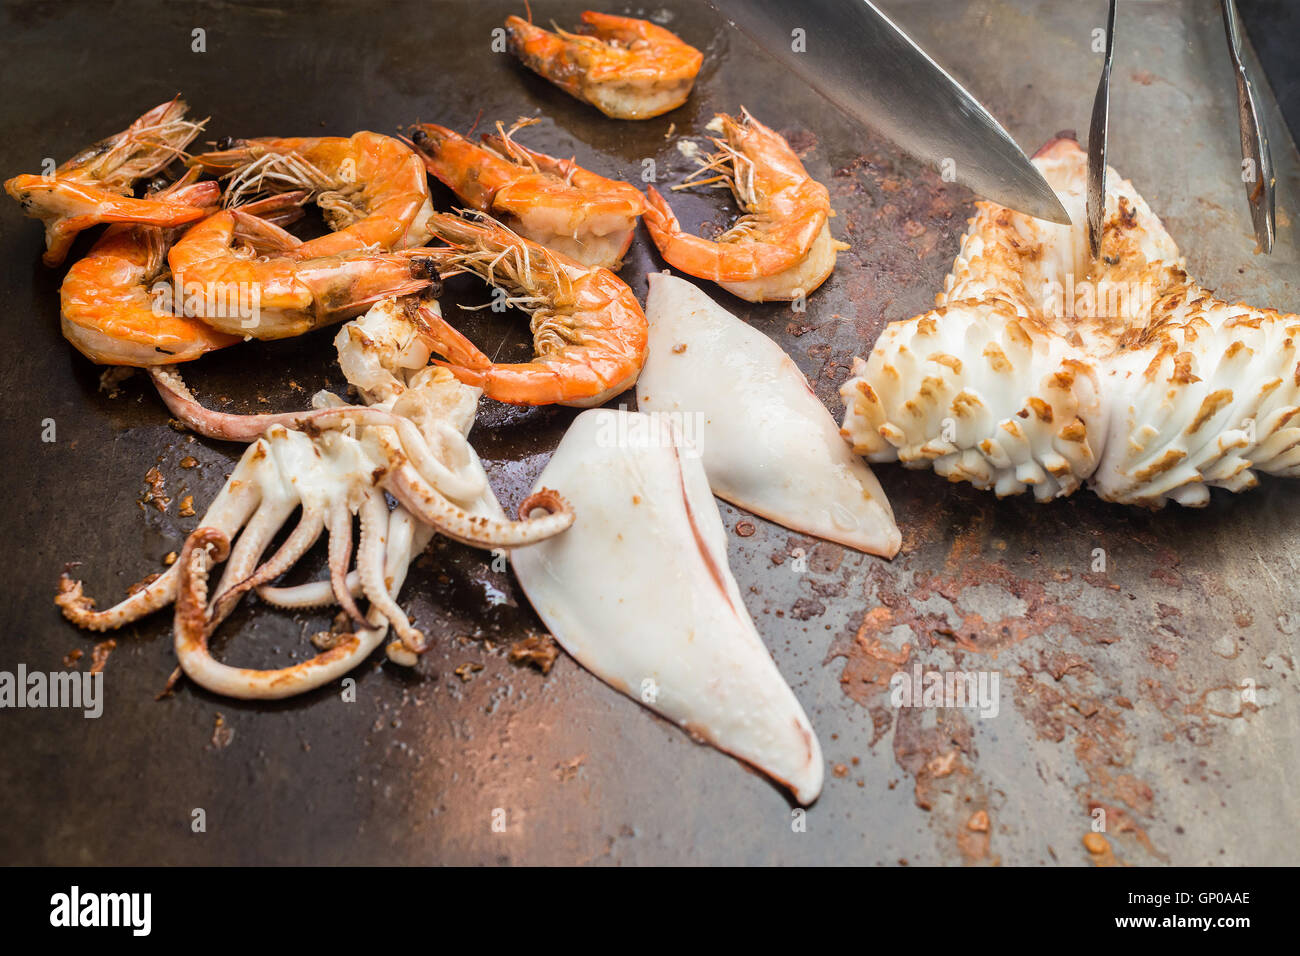 delicious grilled seafood on pan, close up Stock Photo